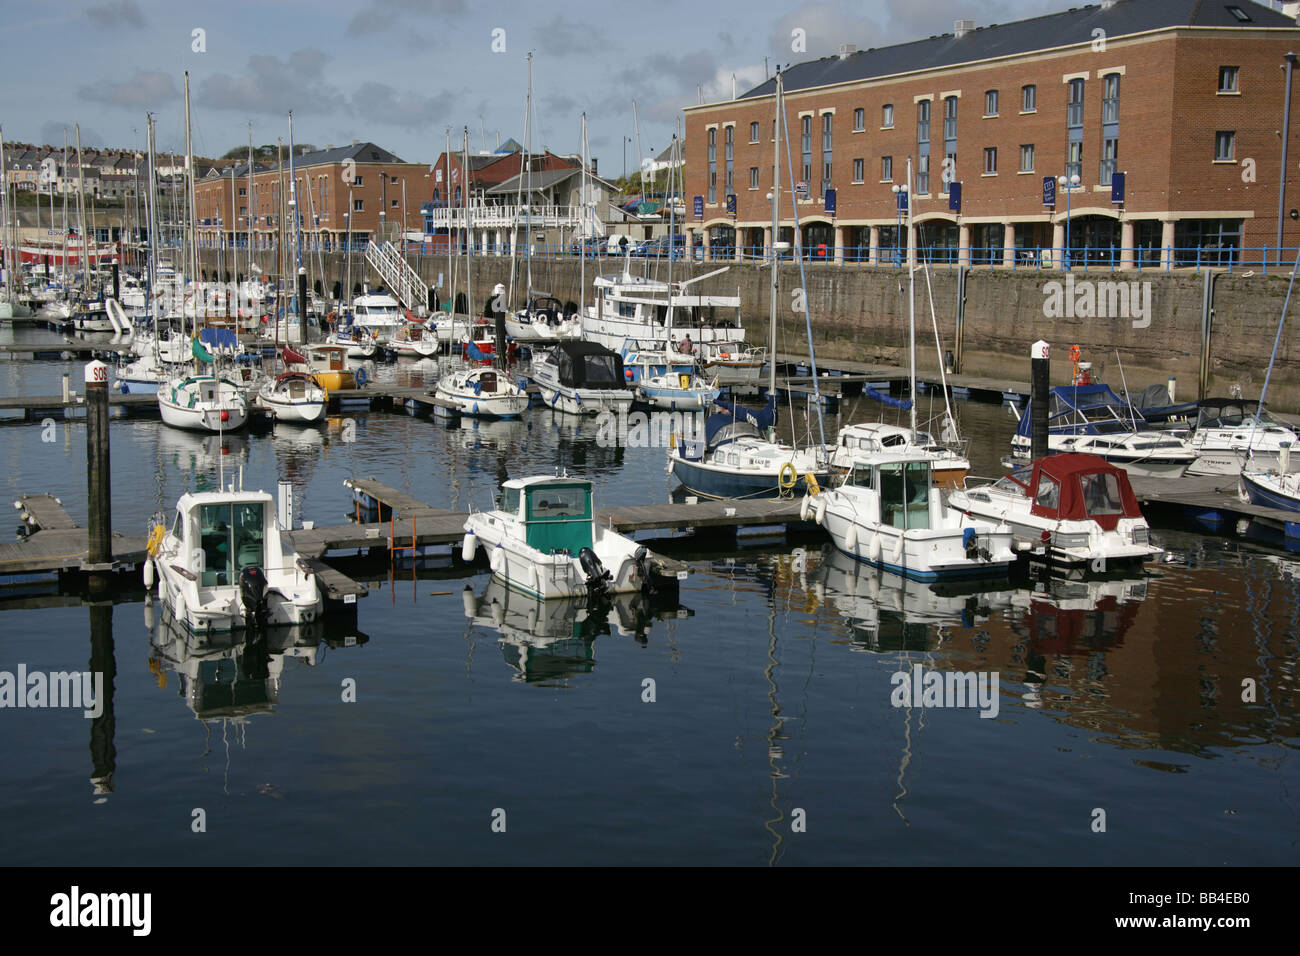 Town of Milford Haven, Wales. Leisure craft berthed at the Milford Haven Port Authority Nelson Quay Marina. Stock Photo